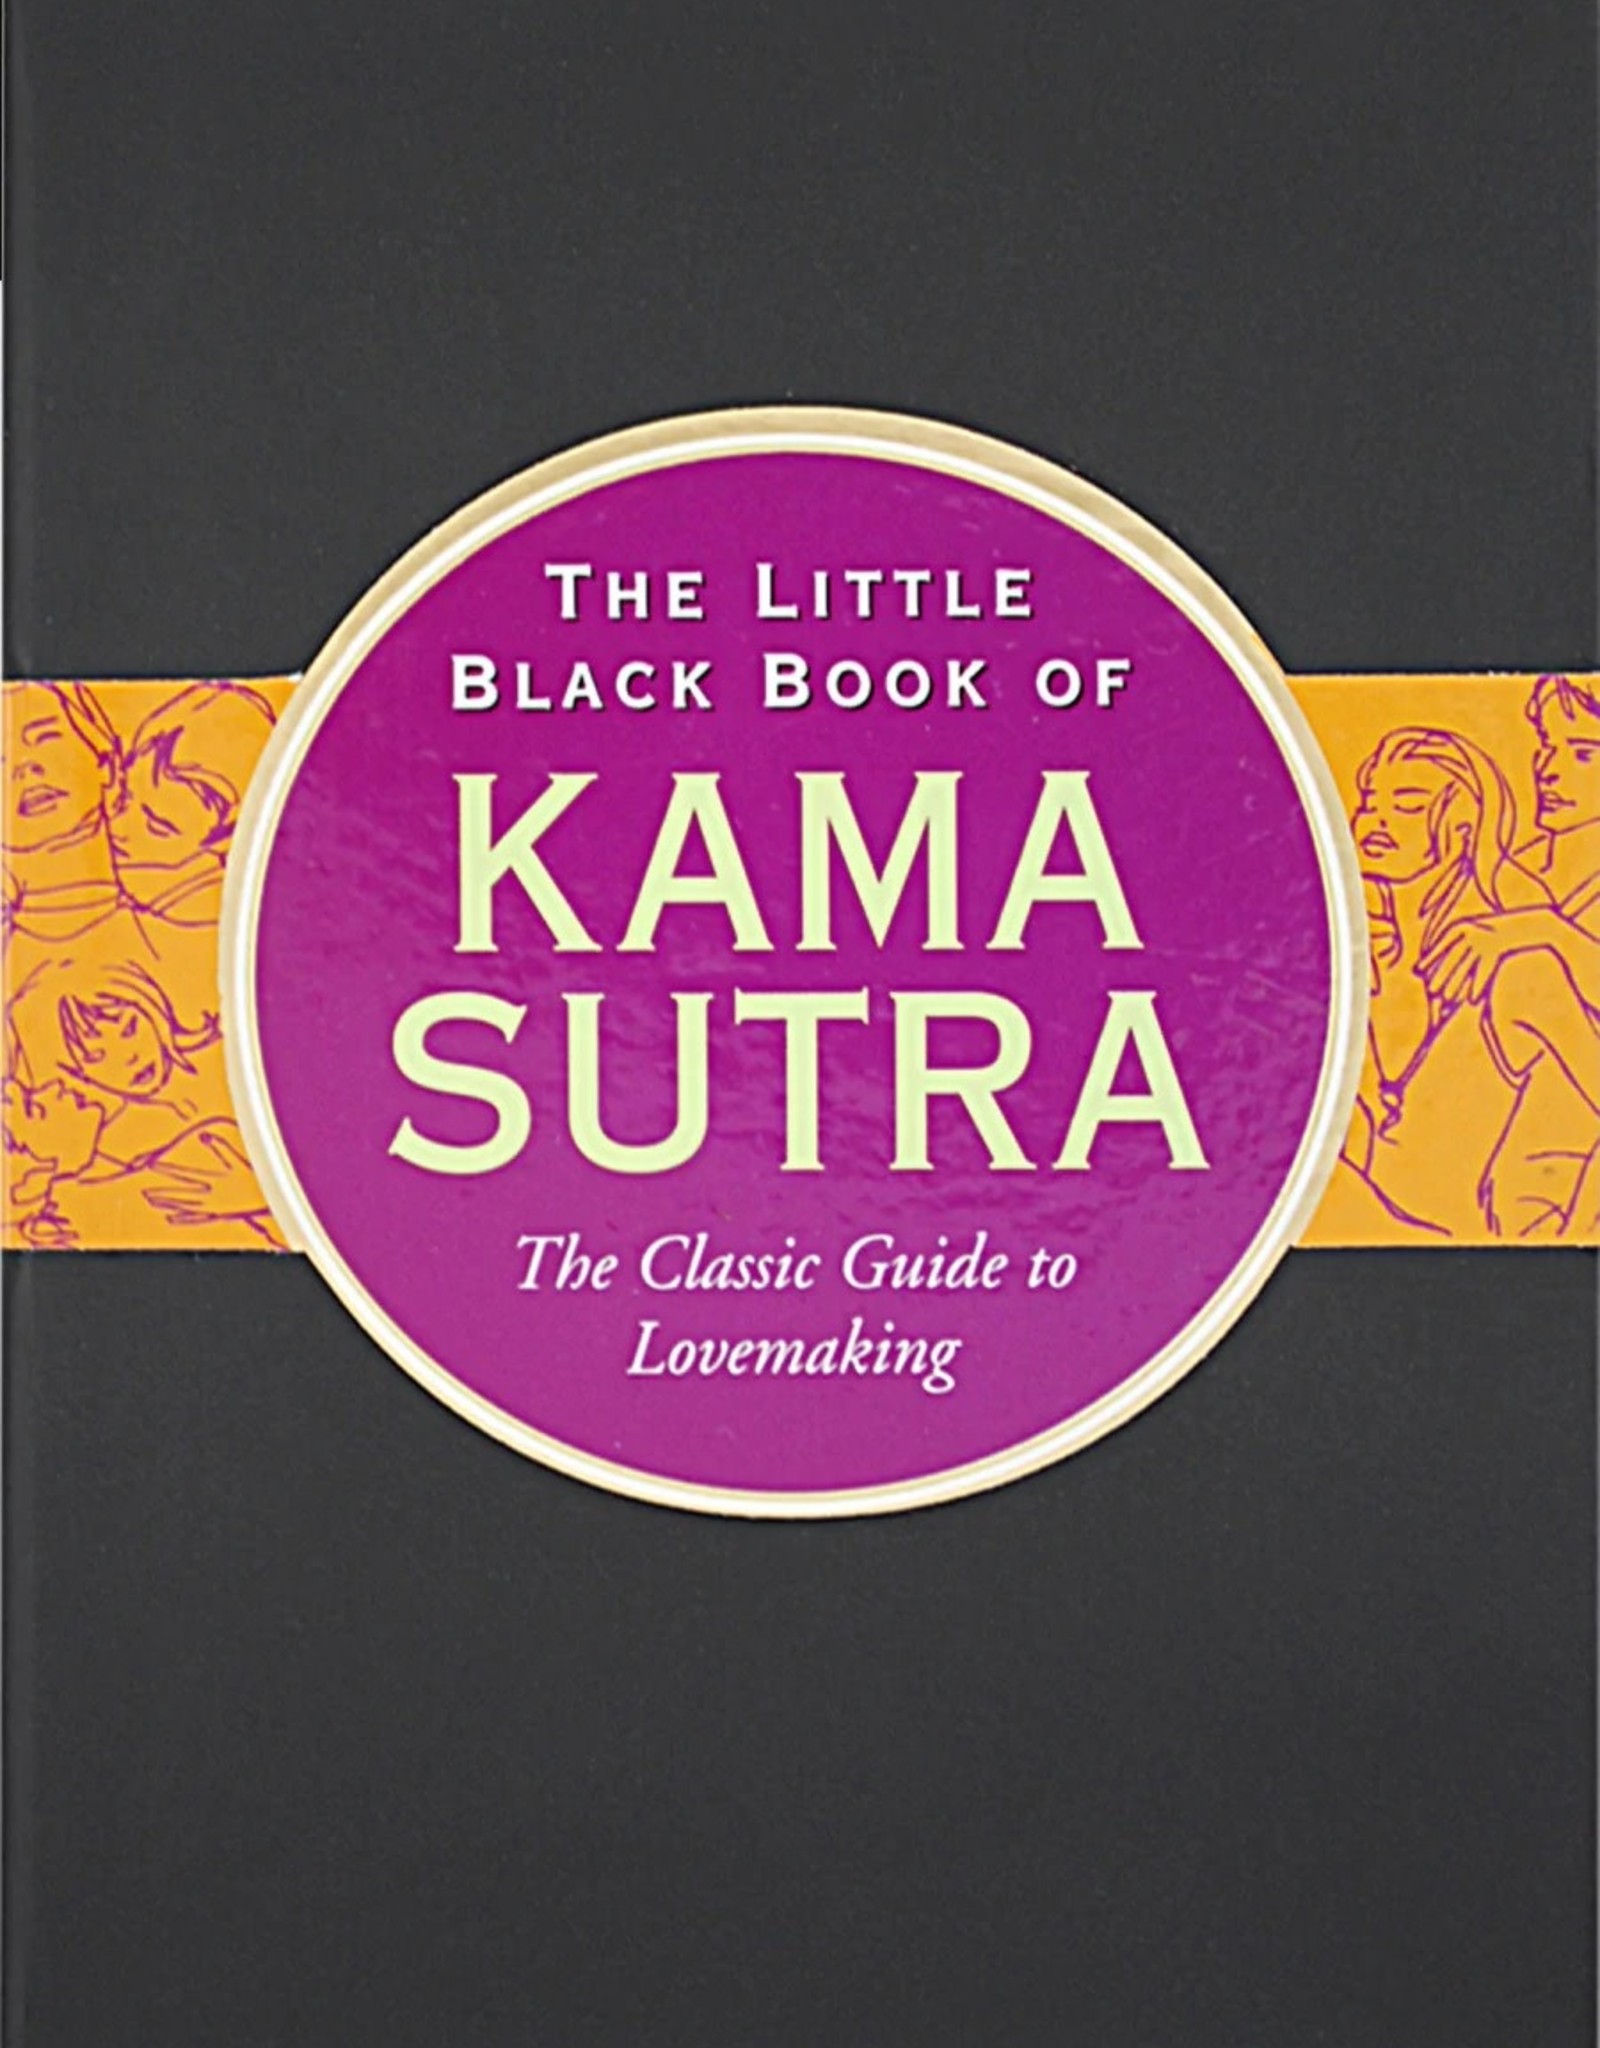 The Little Black Book of Kama Sutra